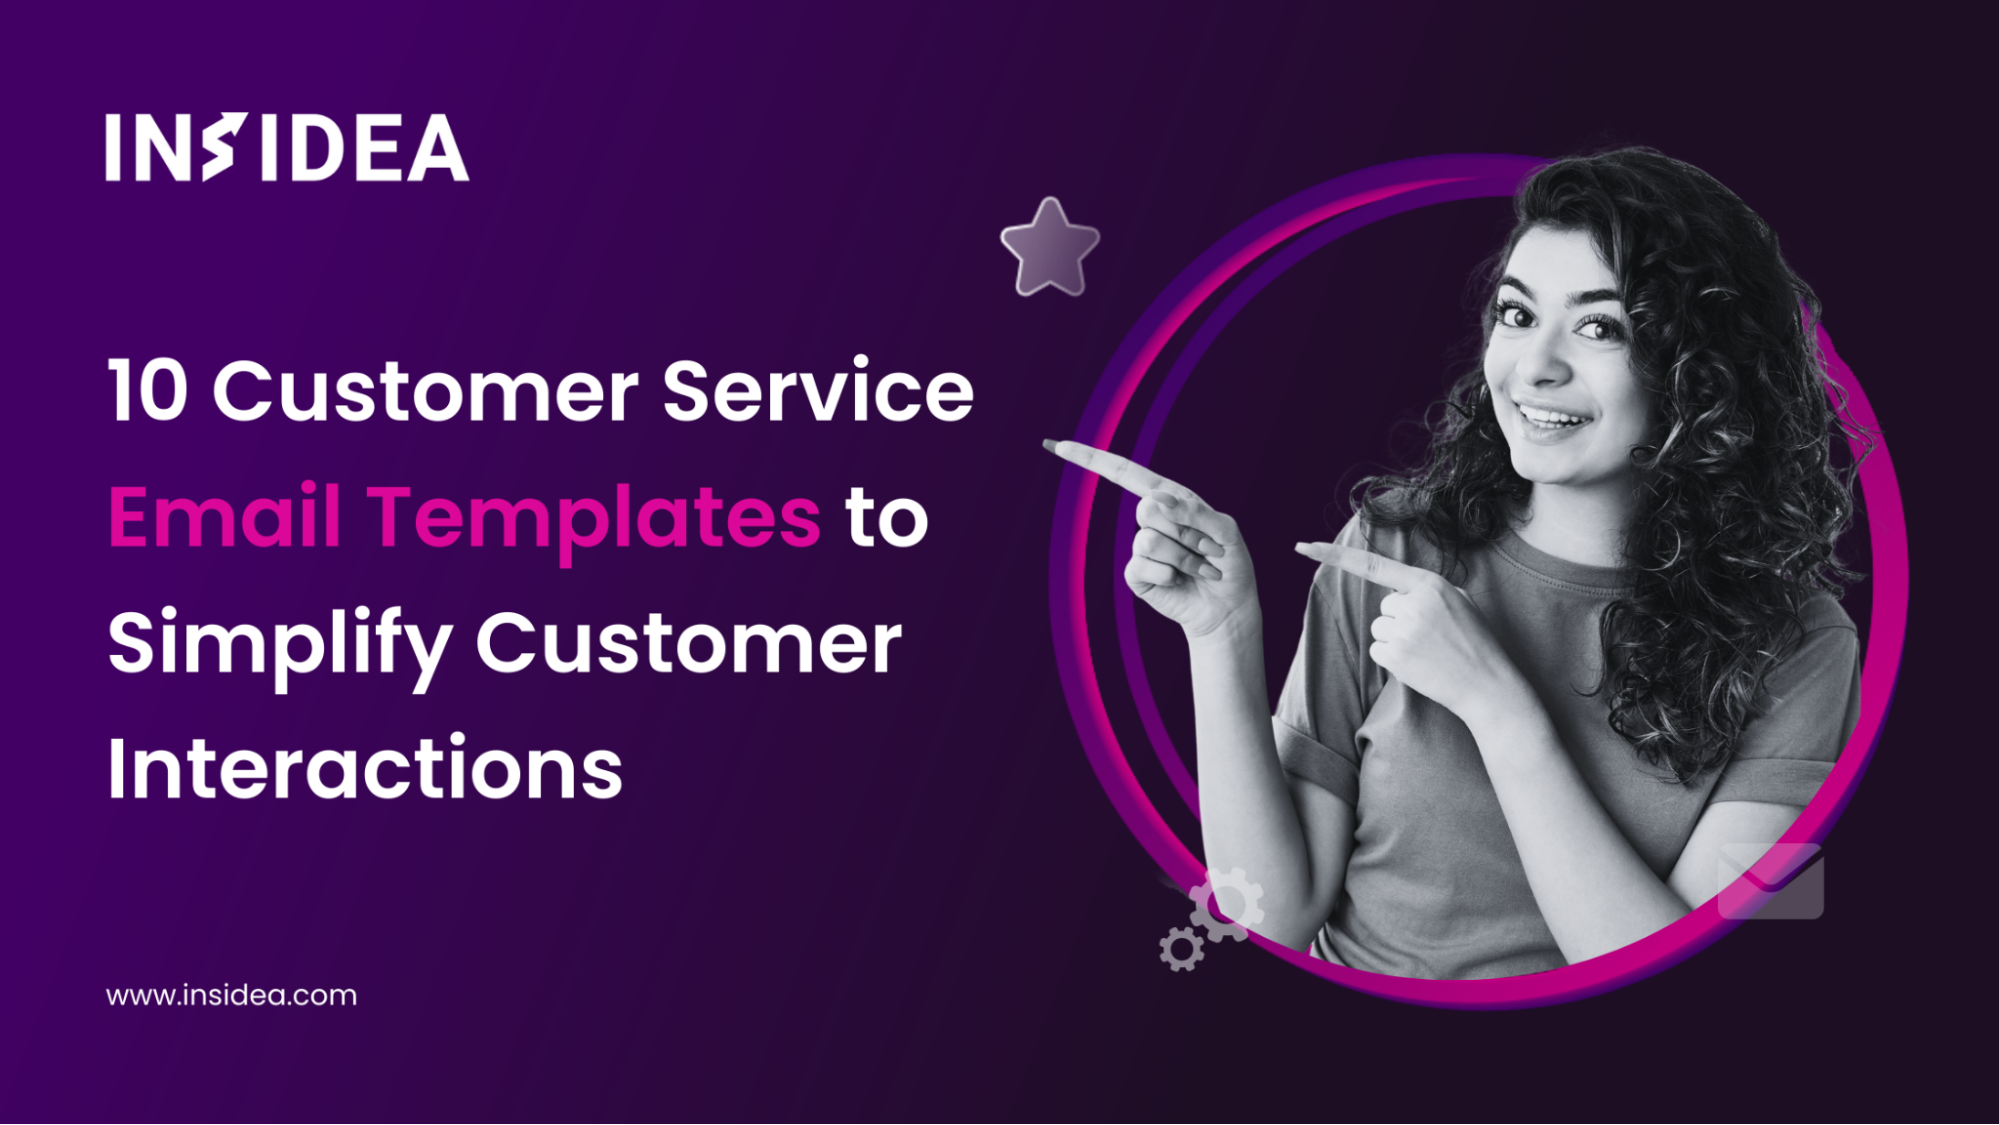 10 Customer Service Email Templates to Simplify Customer Interactions